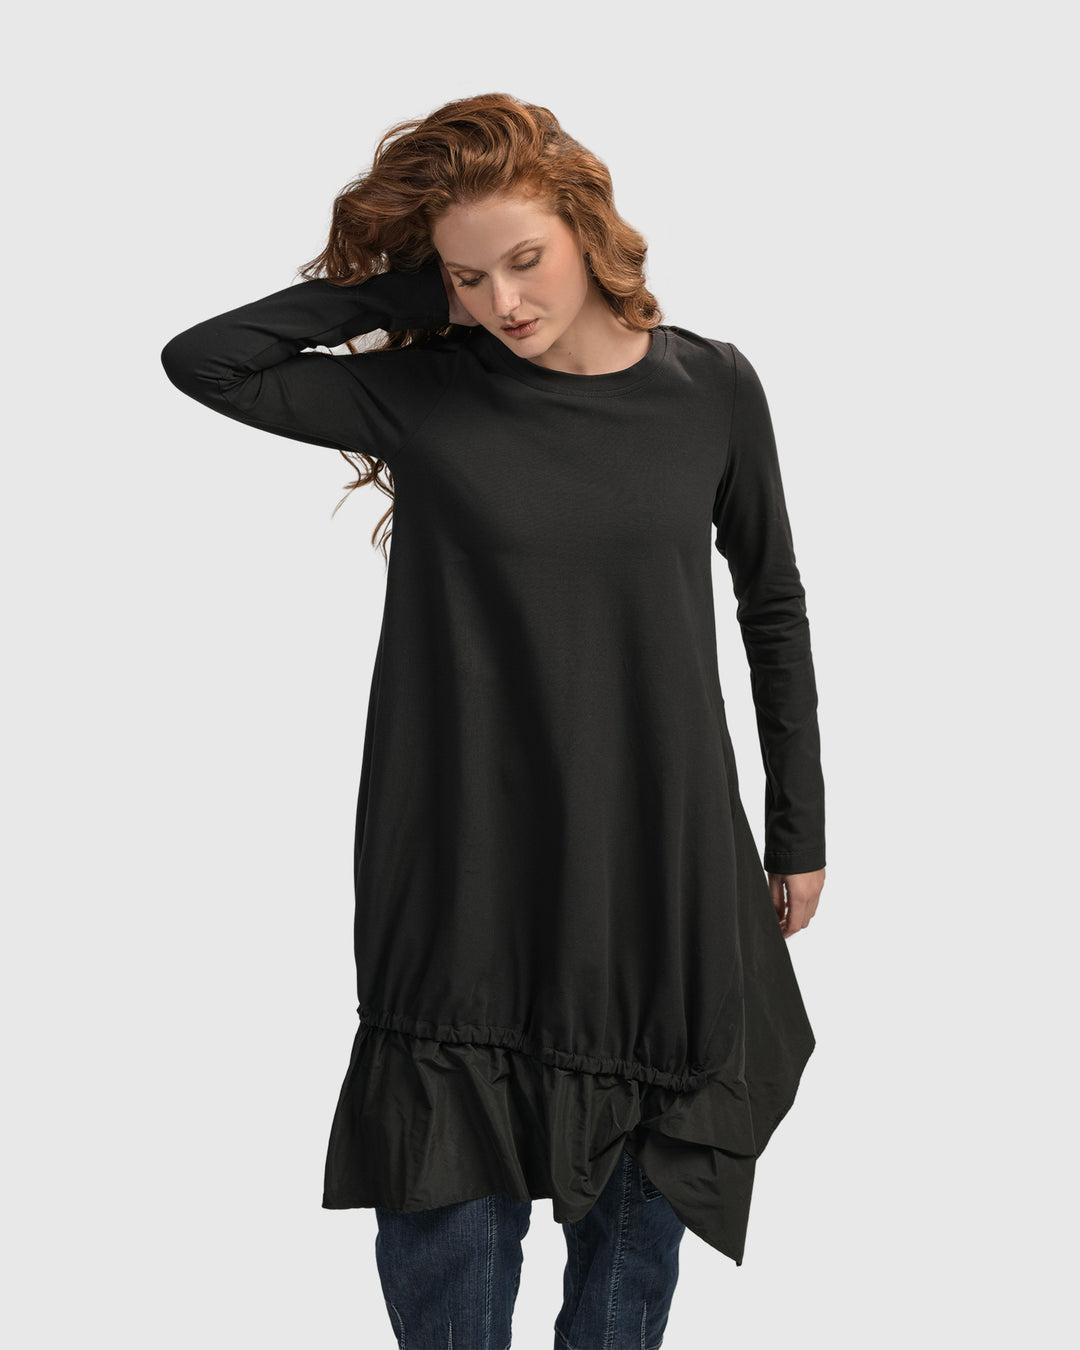 A woman wearing an ALEMBIKA Urban New Wave Tunic Top in Black with long sleeves.